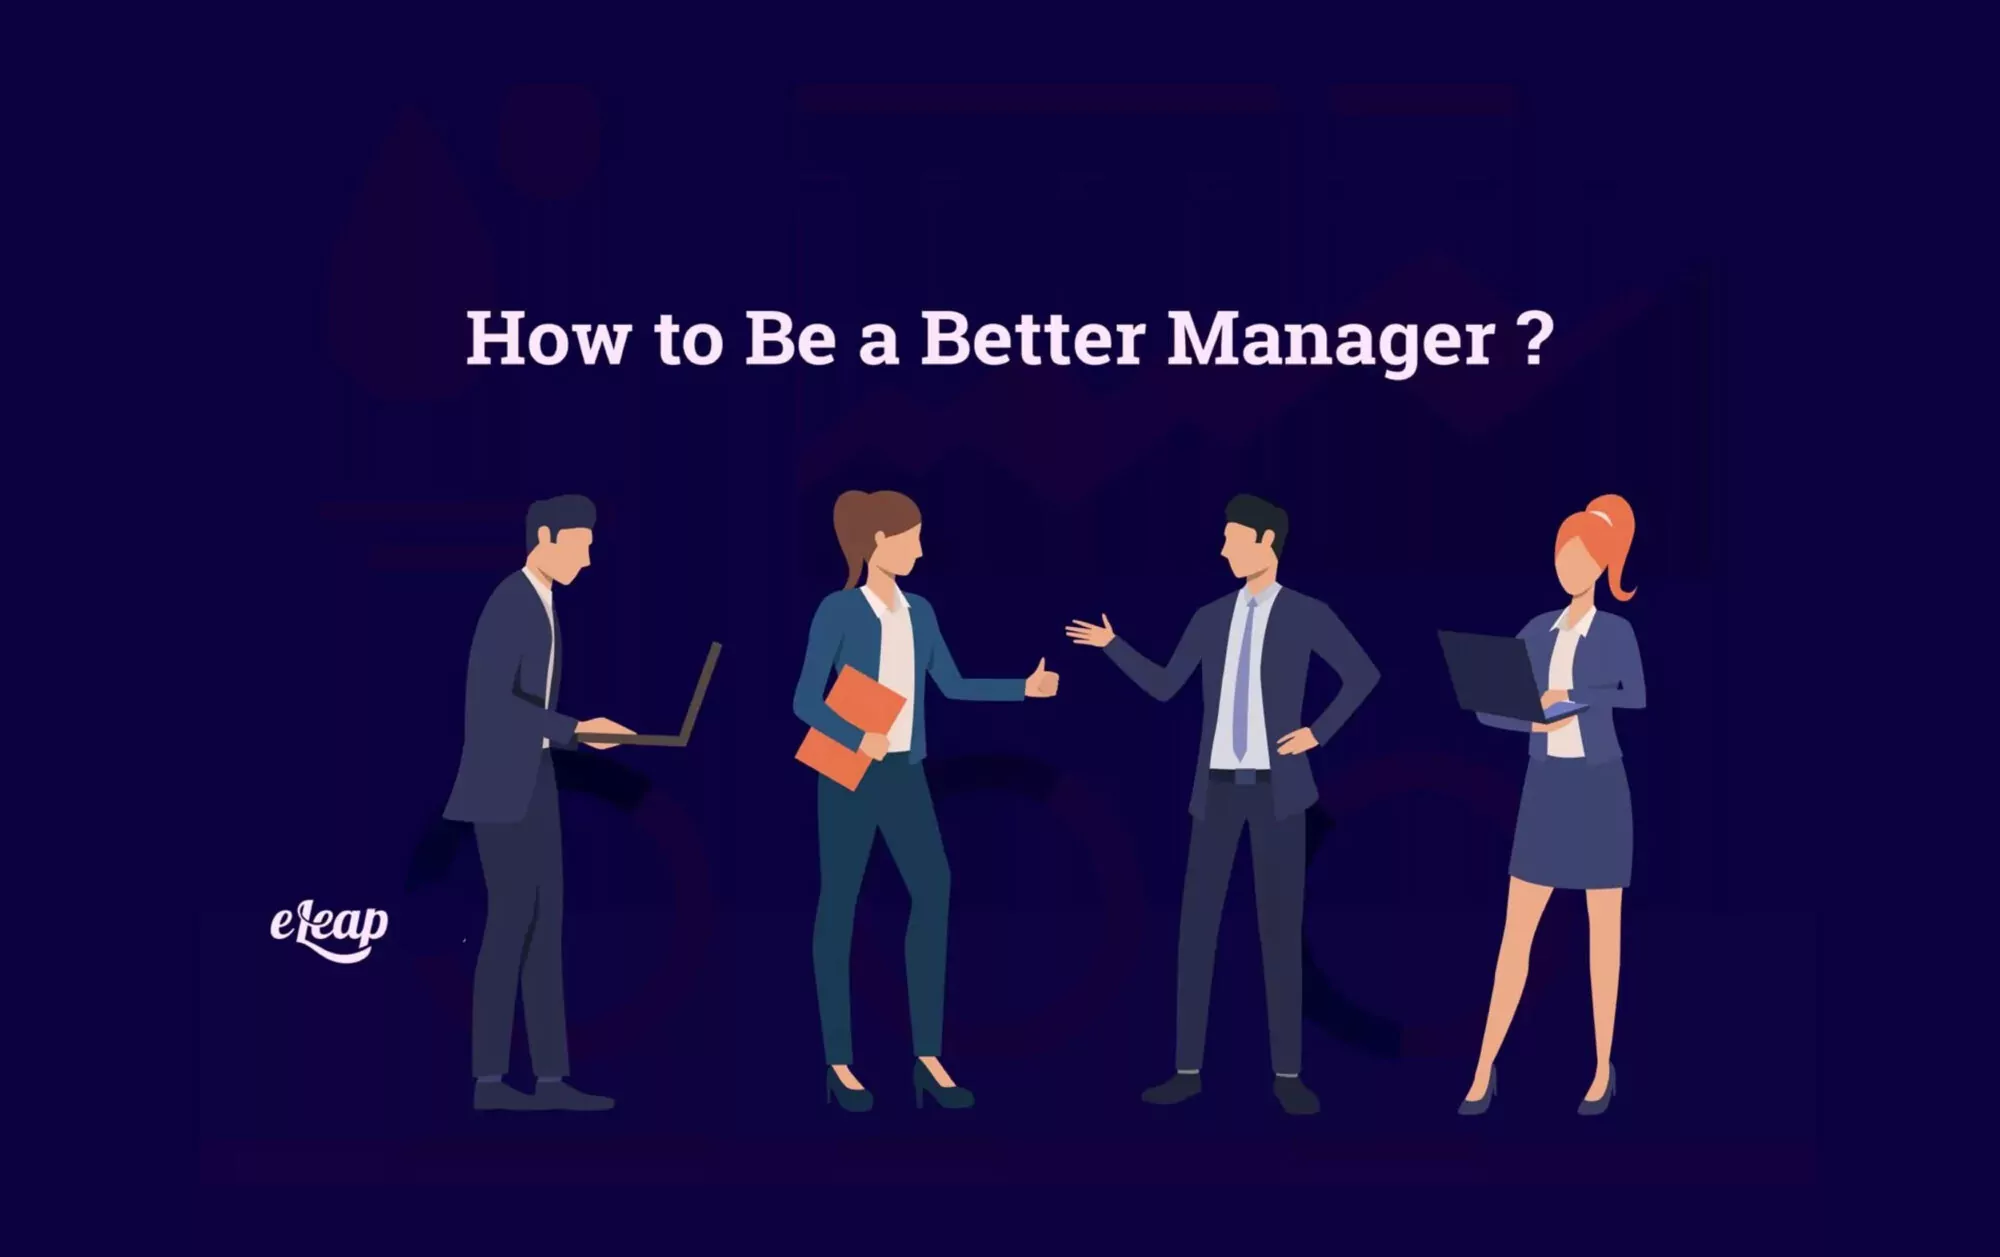 How to Be a Better Manager